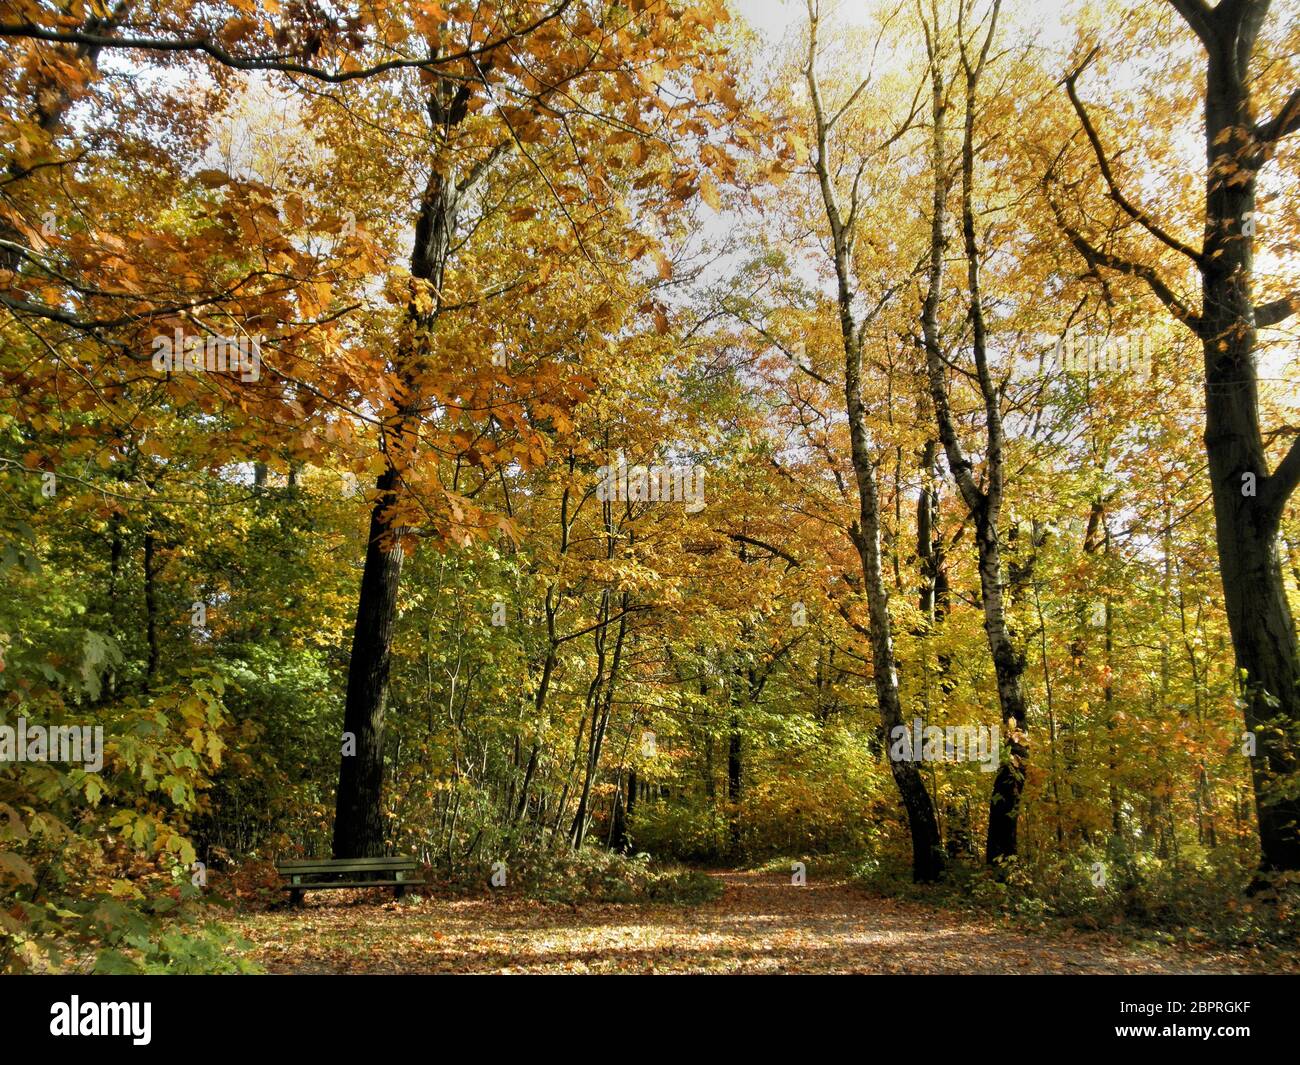 Rastplatz in einem Buchenwald im Herbst, sonniger Tag, bunte Laubbäume Resting place in a beech forest in autumn, sunny day, colorful deciduous trees Stock Photo